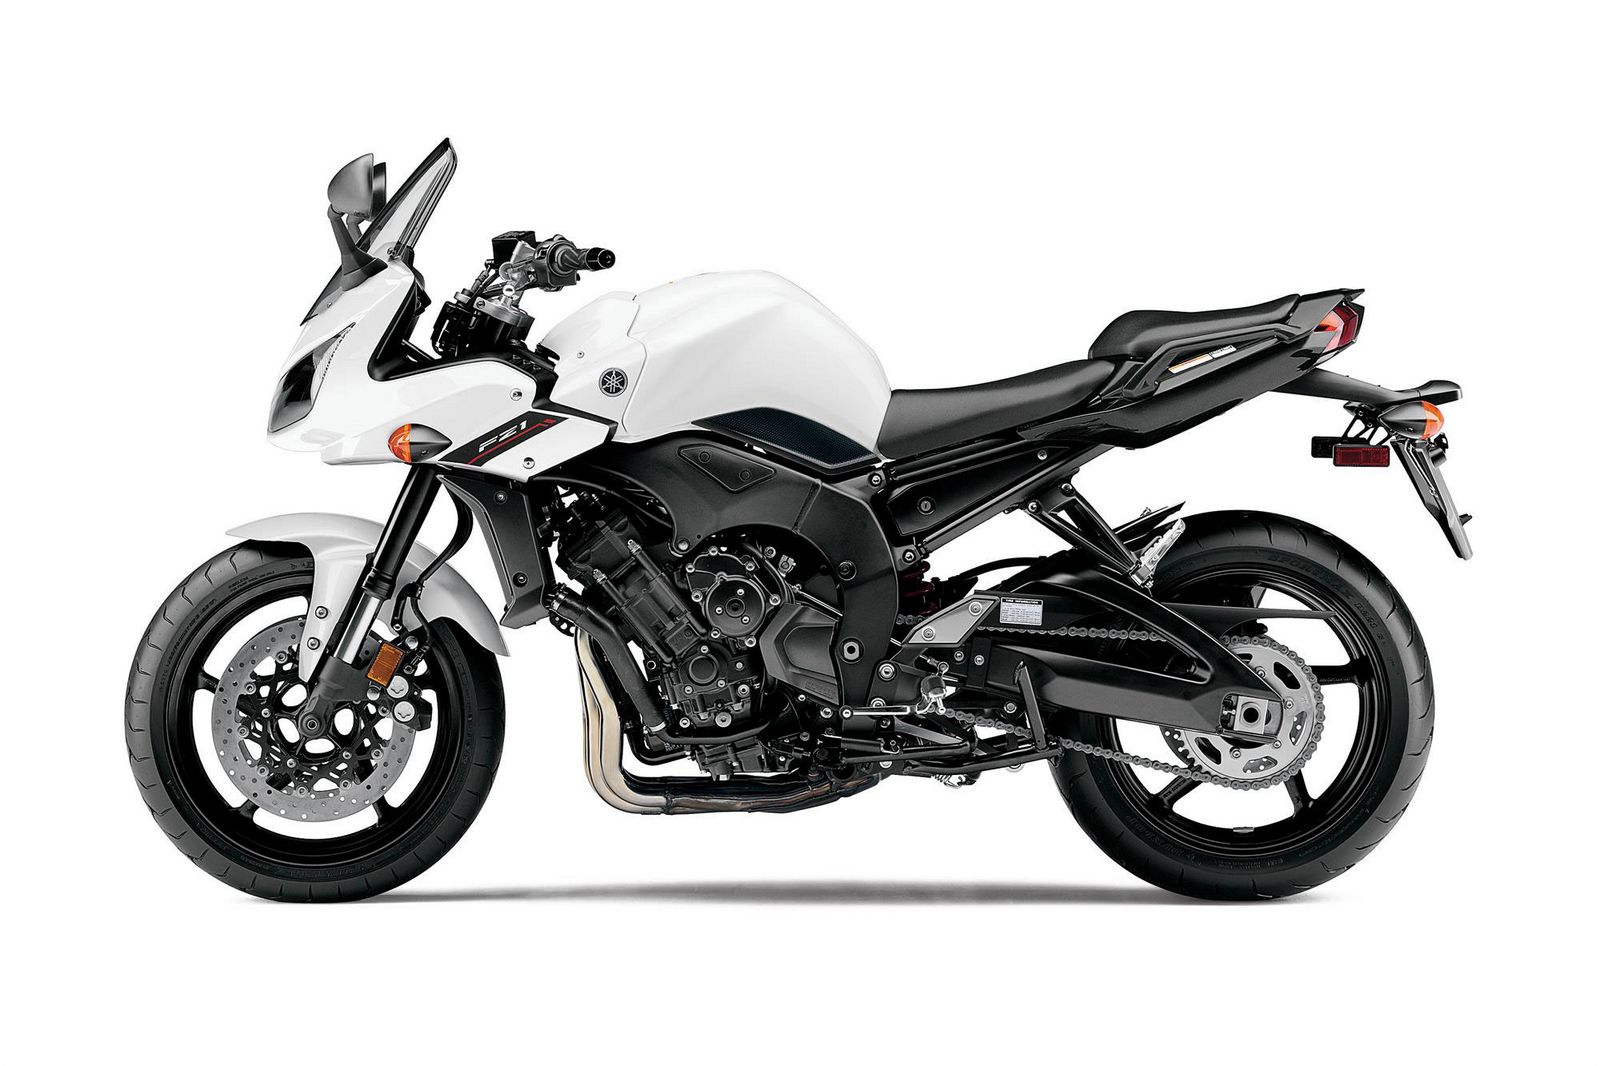 2012 YAMAHA FZ1 motorcycle pictures, review and specifications